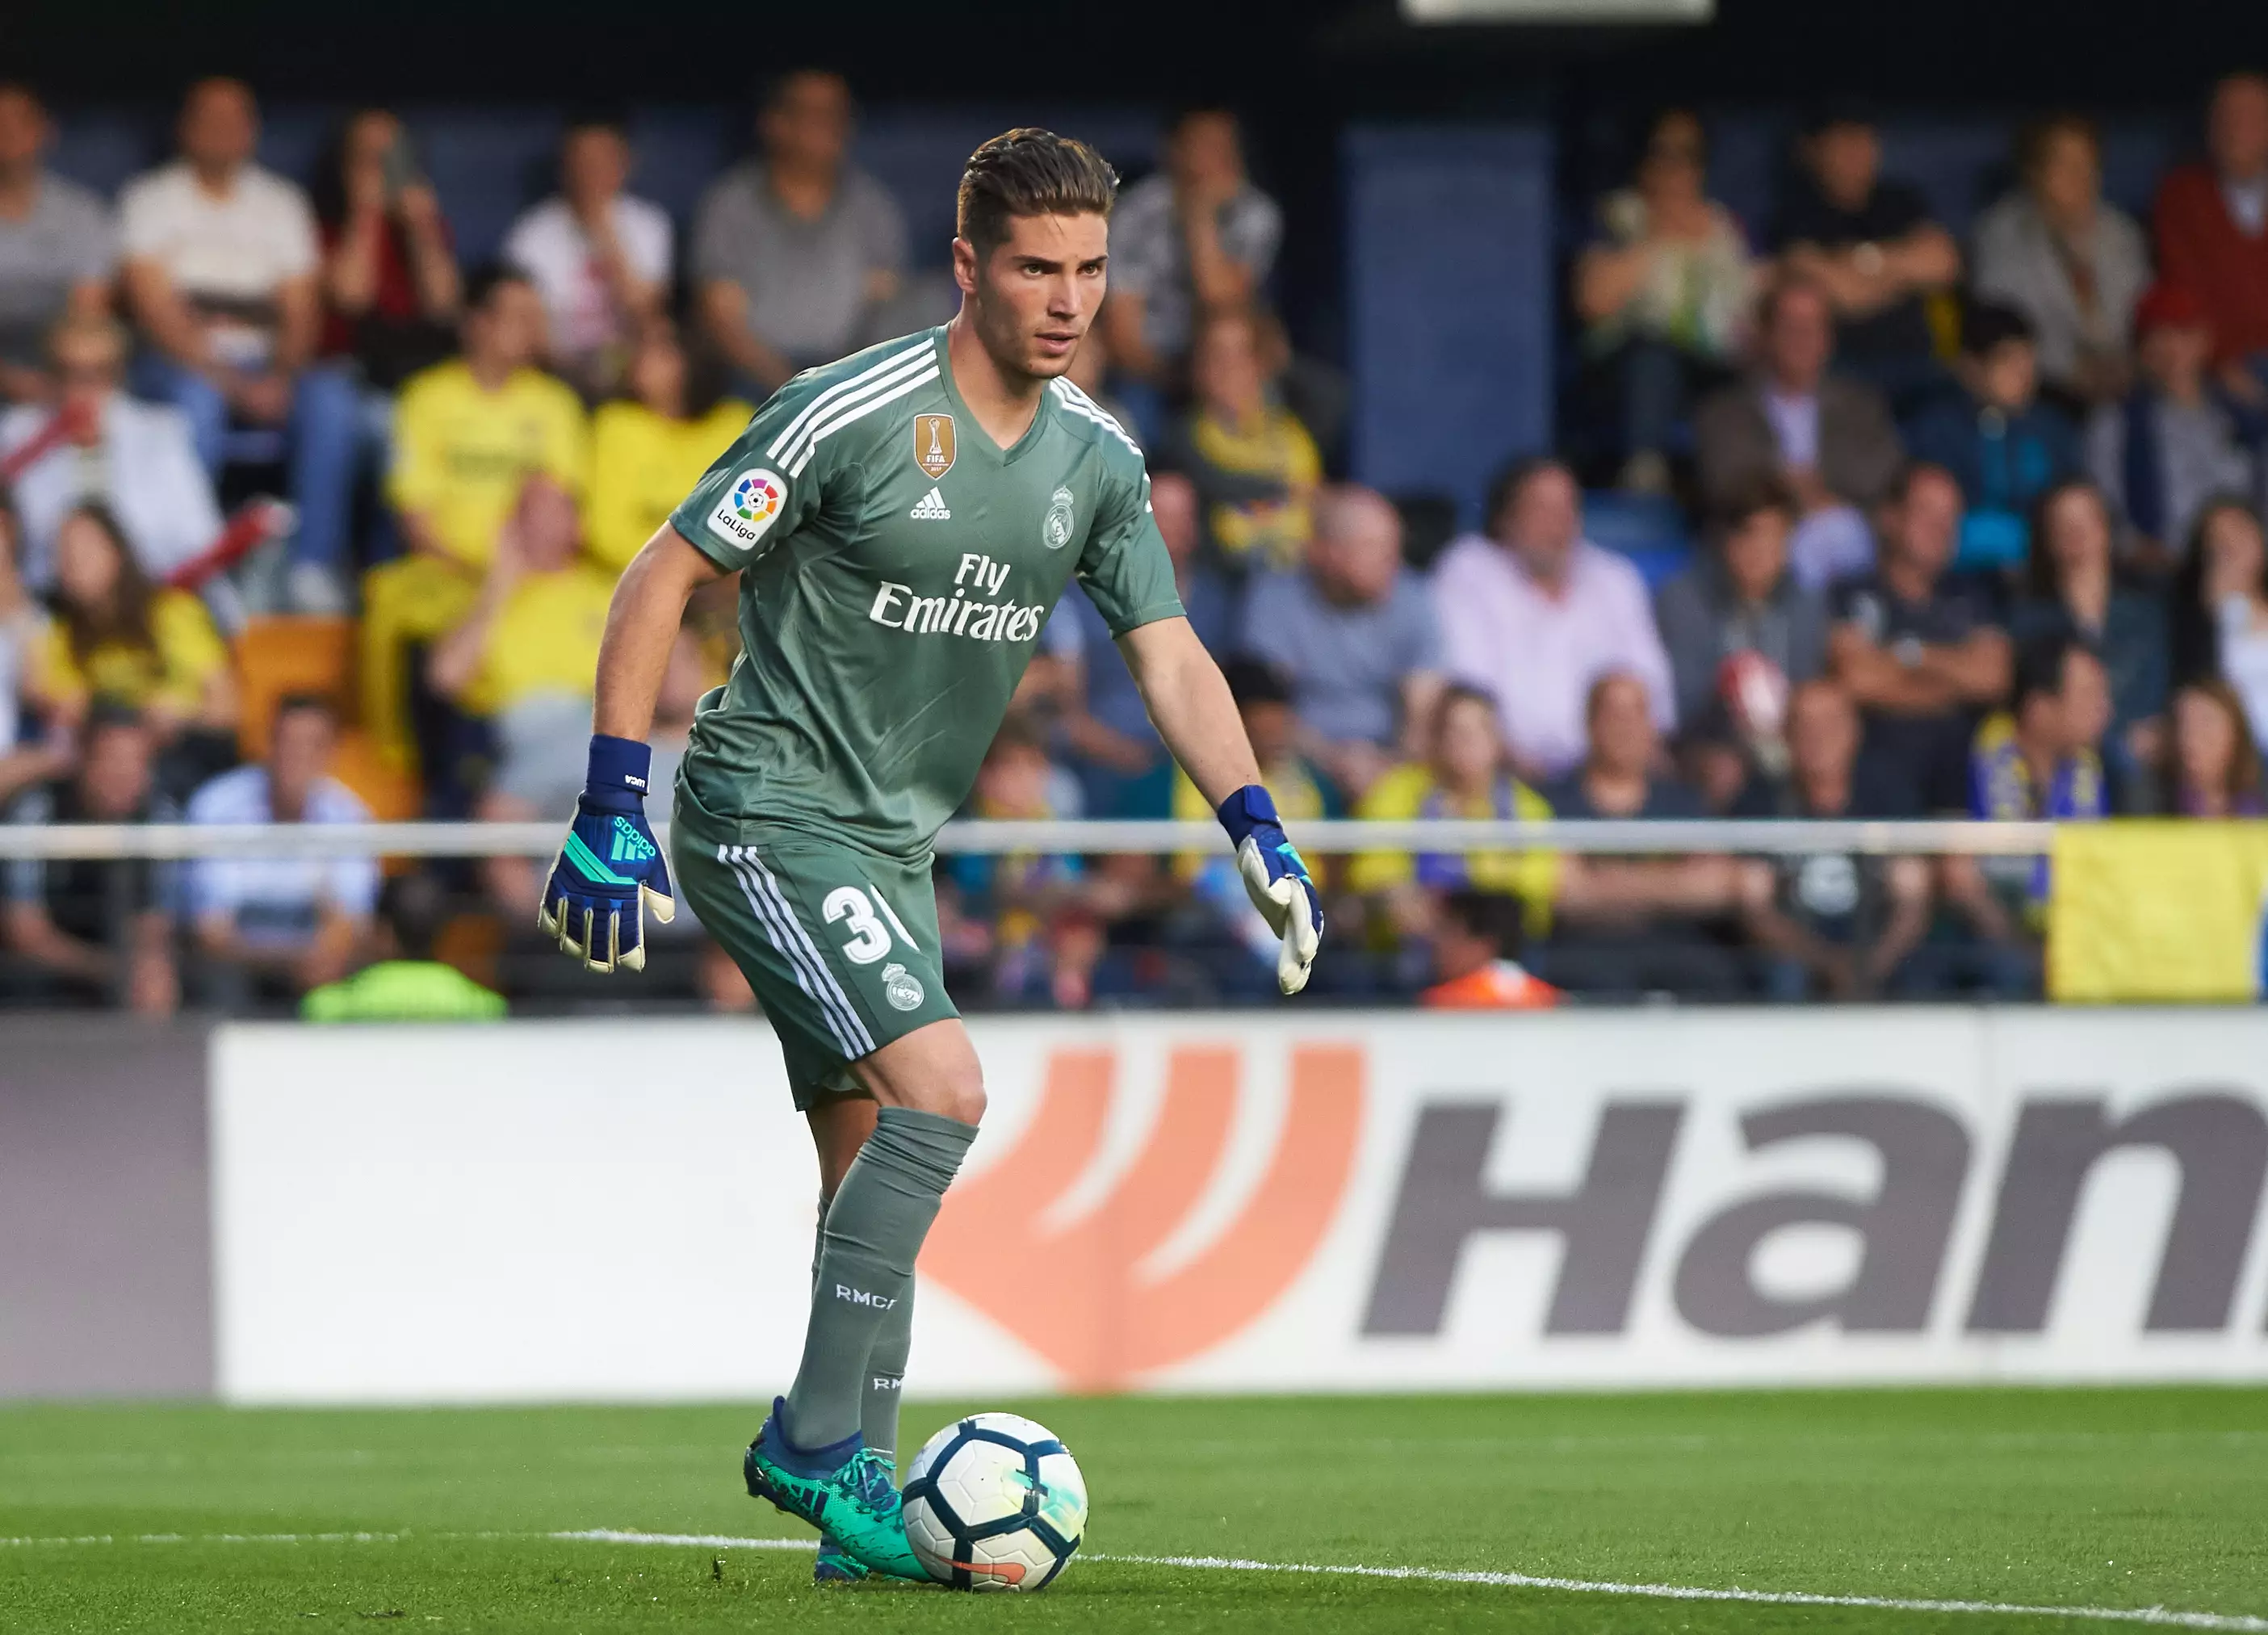 Luca Zidane's position as back up keeper at the Bernabeu is under threat. Image: PA Images